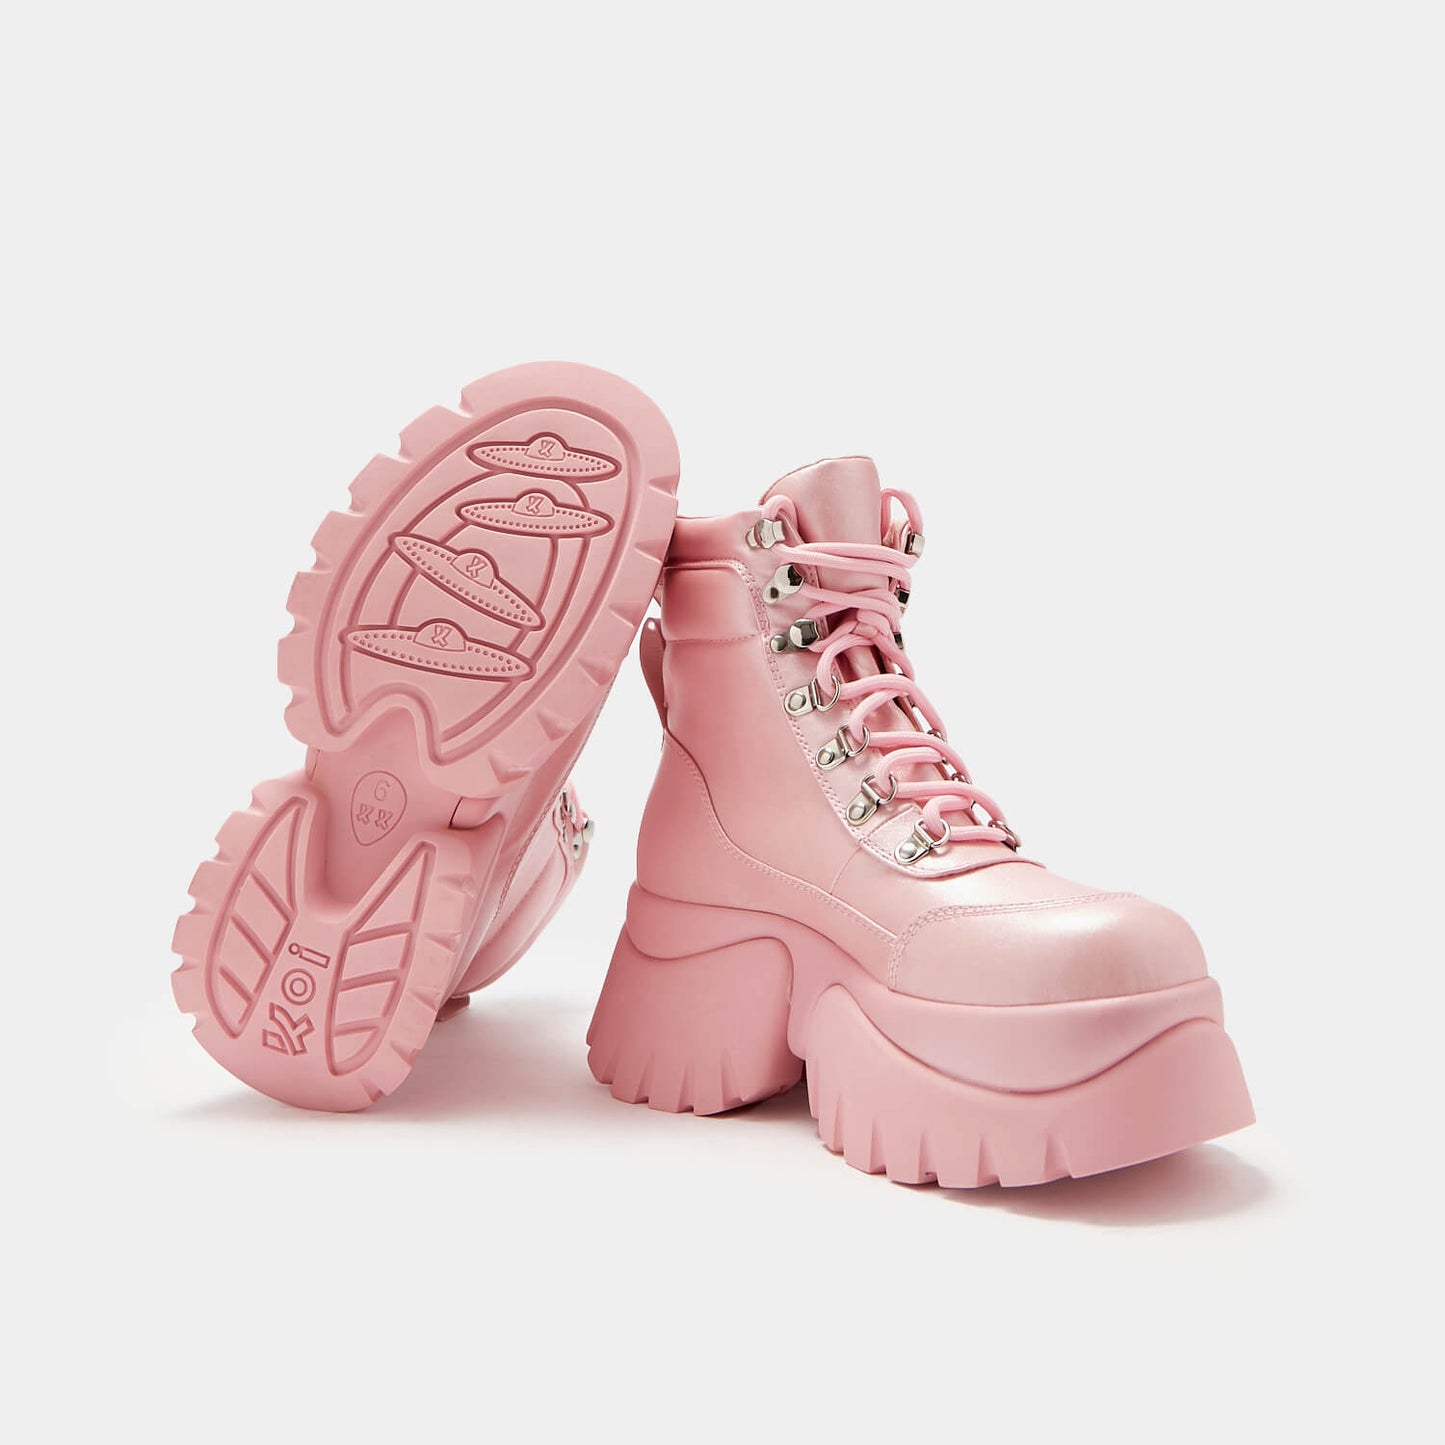 Gooey Bubblegum Platform Boots - Ankle Boots - KOI Footwear - Pink - Sole and Front Detail